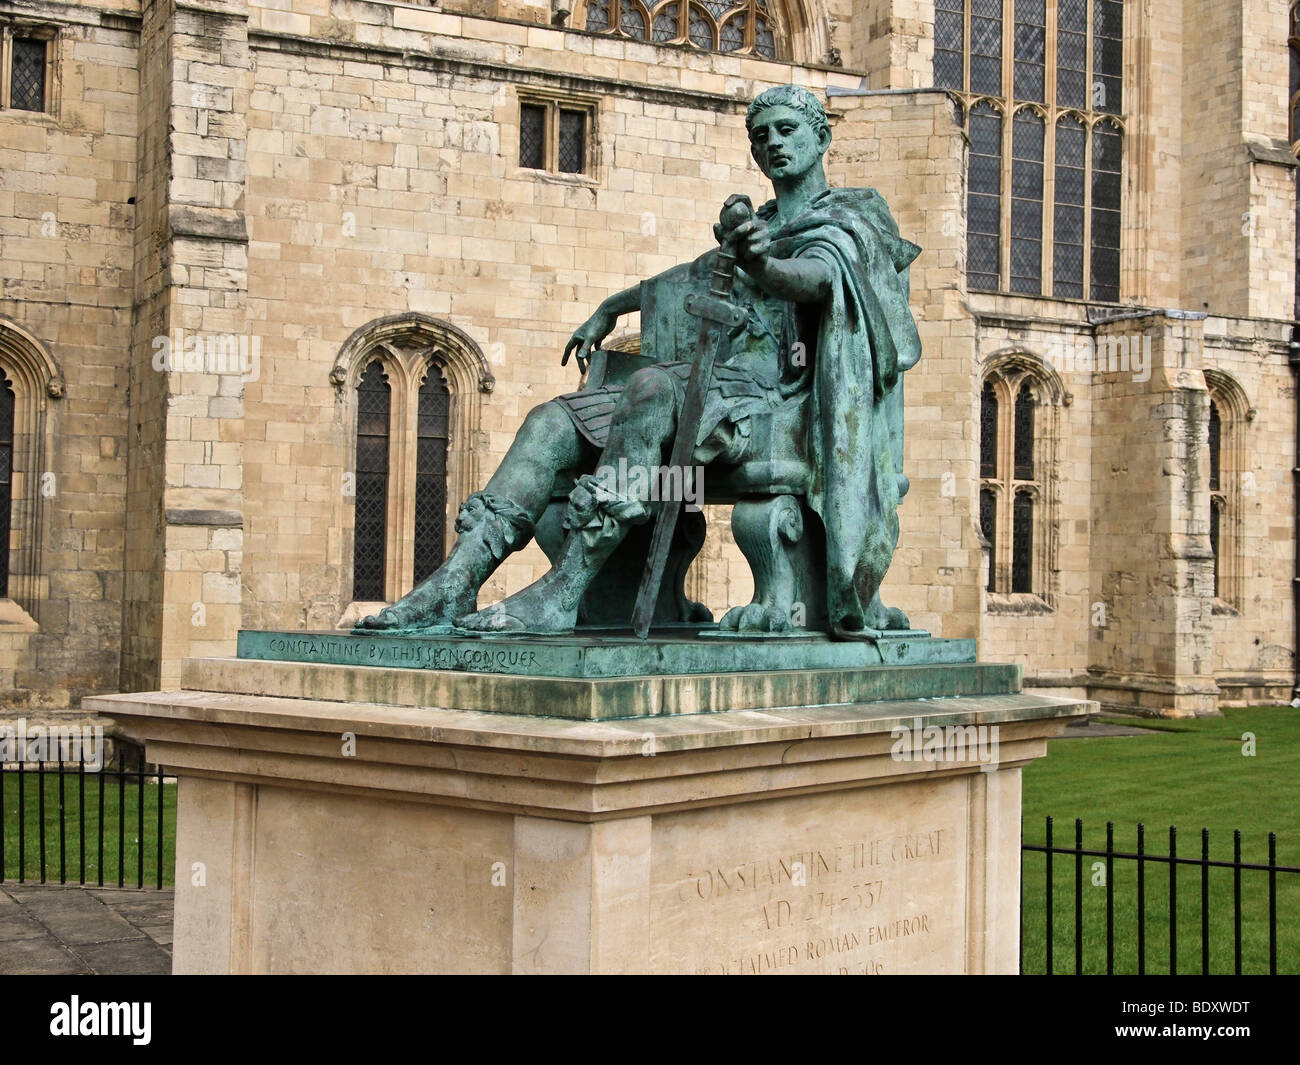 Statue of Emperor Constantine AD 274 - 337 outside York Minster England UK Stock Photo